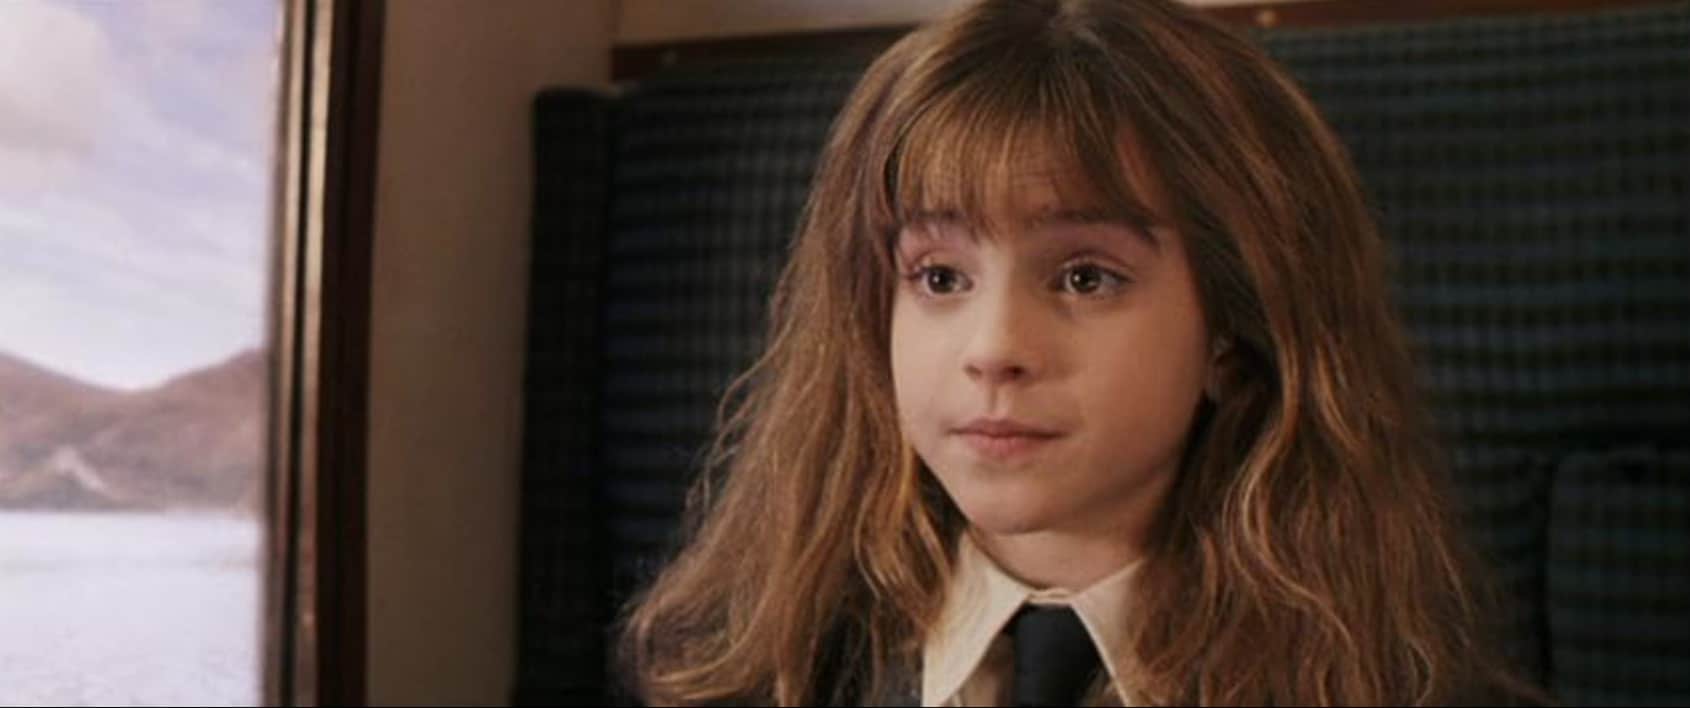 <ul> <li><strong>Who said it:</strong> Hermione</li> <li><strong>Played by:</strong> Emma Watson</li> <li><strong>Movie:</strong> Harry Potter and the Sorcerer's Stone (2001)</li> </ul> <p>Hermione's classic line about getting expelled is so famous because it's the epitome of her character. When we meet her during Harry's first year at Hogwarts, she comes across as a know-it-all who believes her value comes directly from her performance in school. It's even more interesting when we consider the development of her character throughout the series.</p>